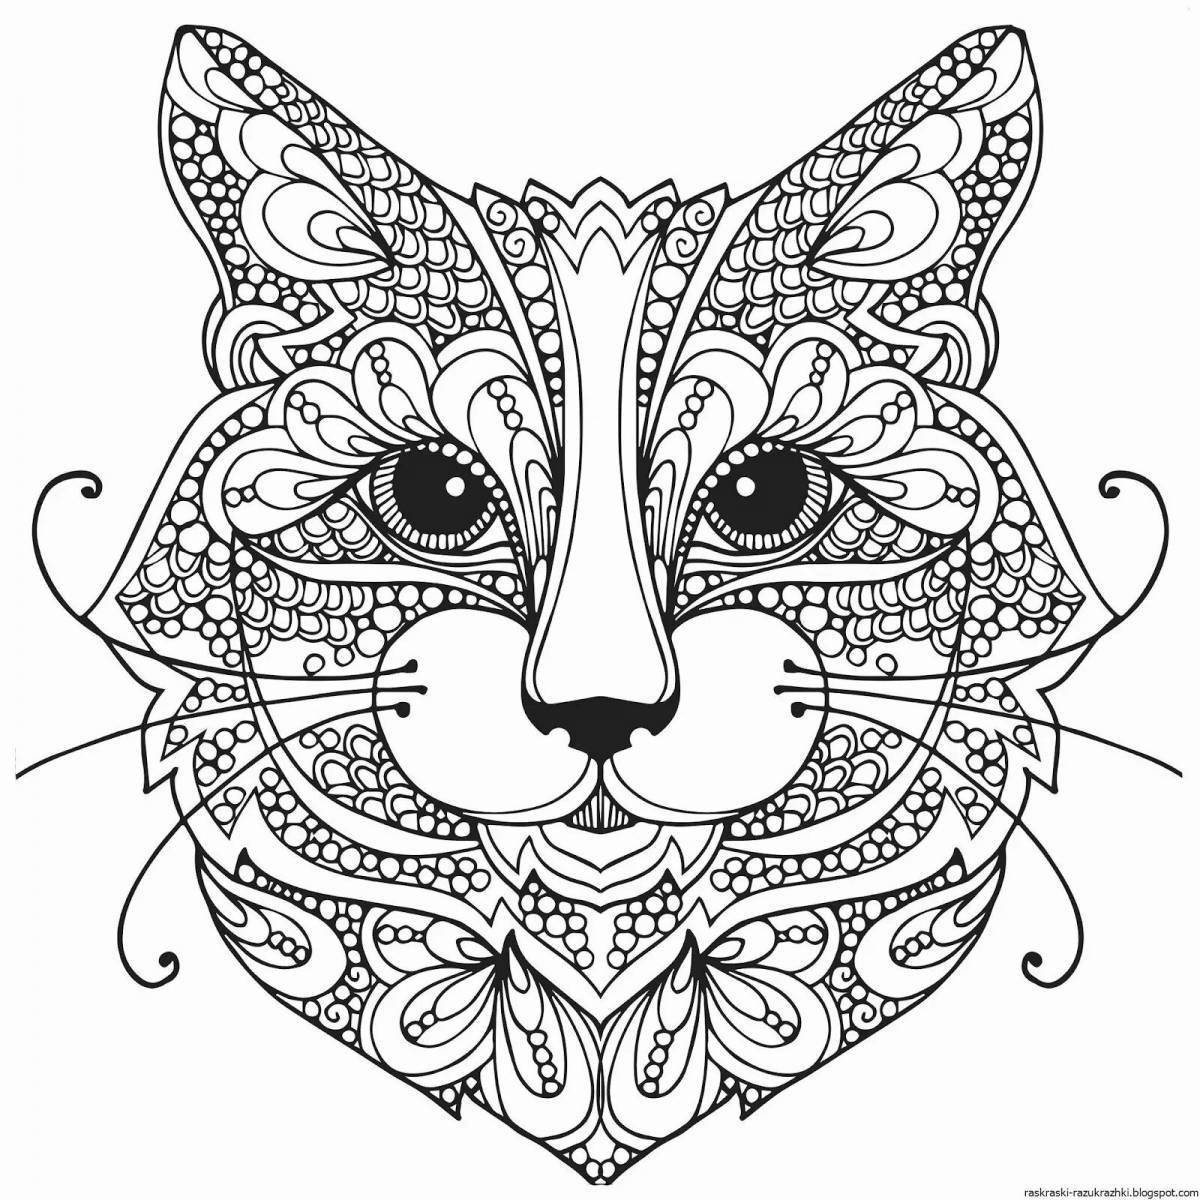 Intricate coloring for girls 12 years old complex patterns antistress animals